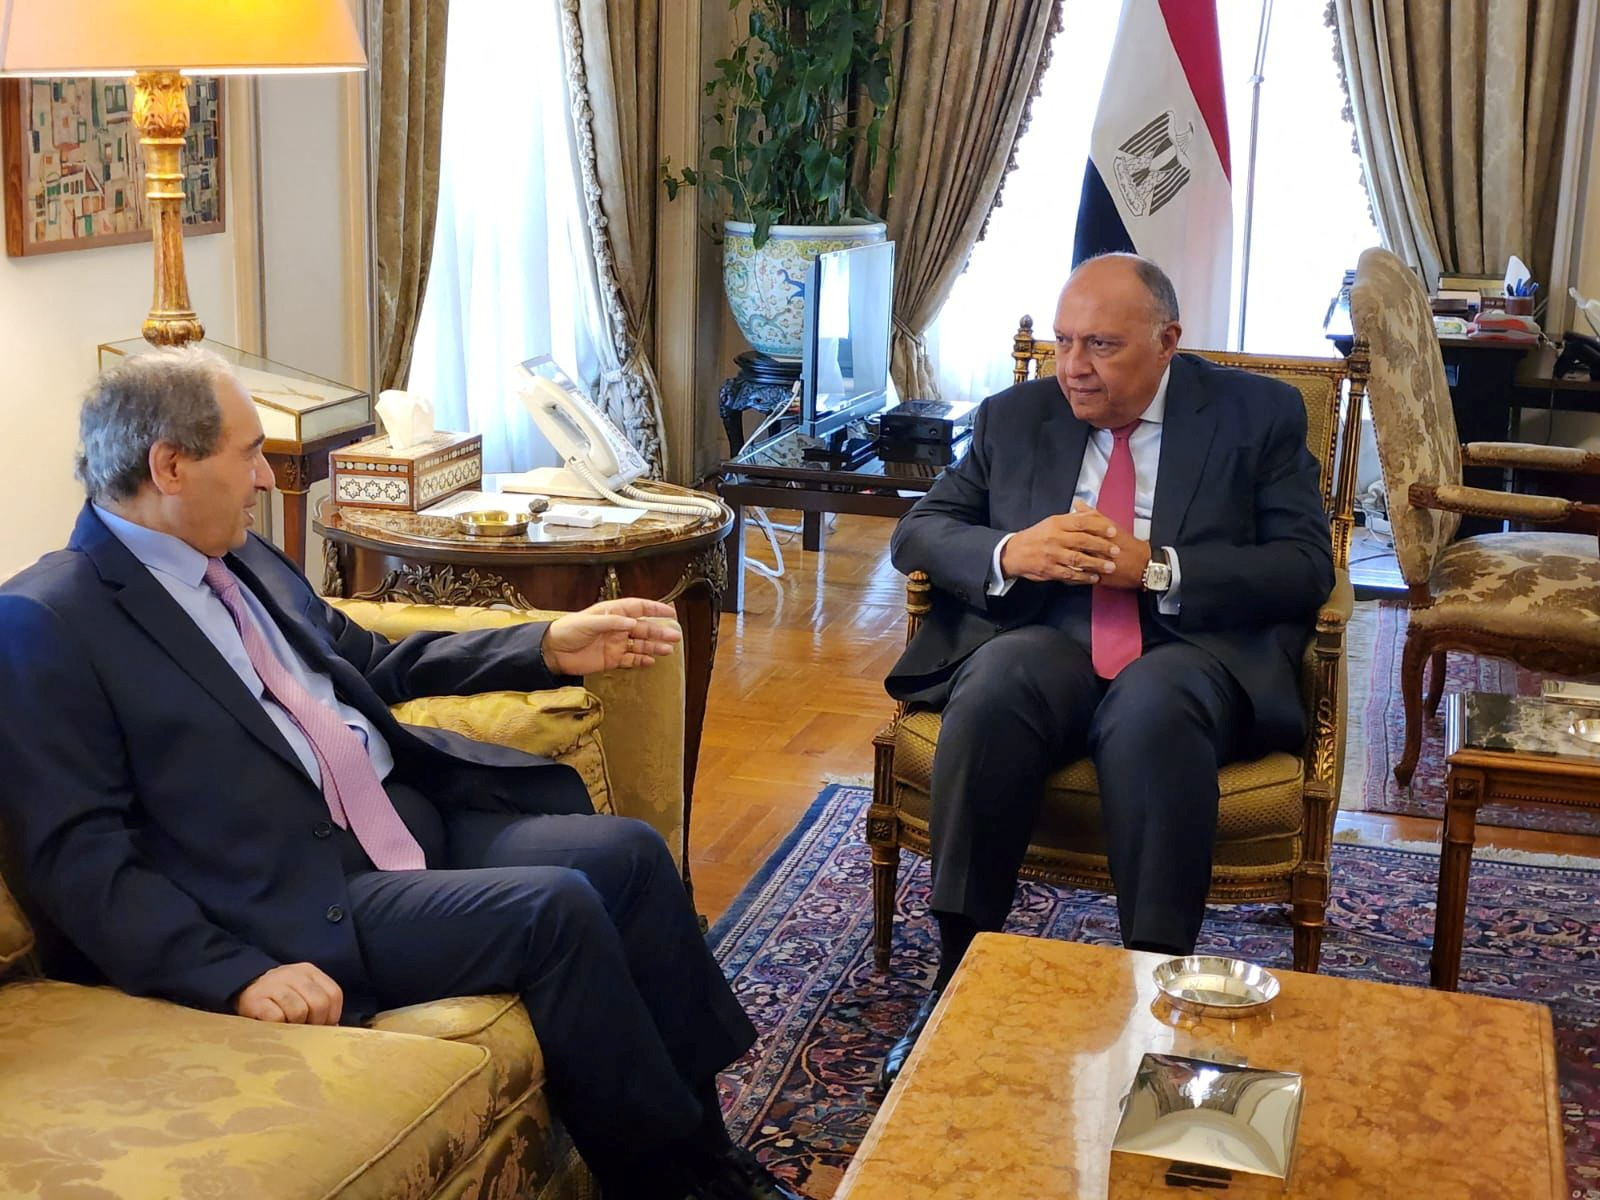 Egyptian Foreign Minister Sameh Shoukry meets with Syrian Foreign Minister Faisal Mekdad in Cairo